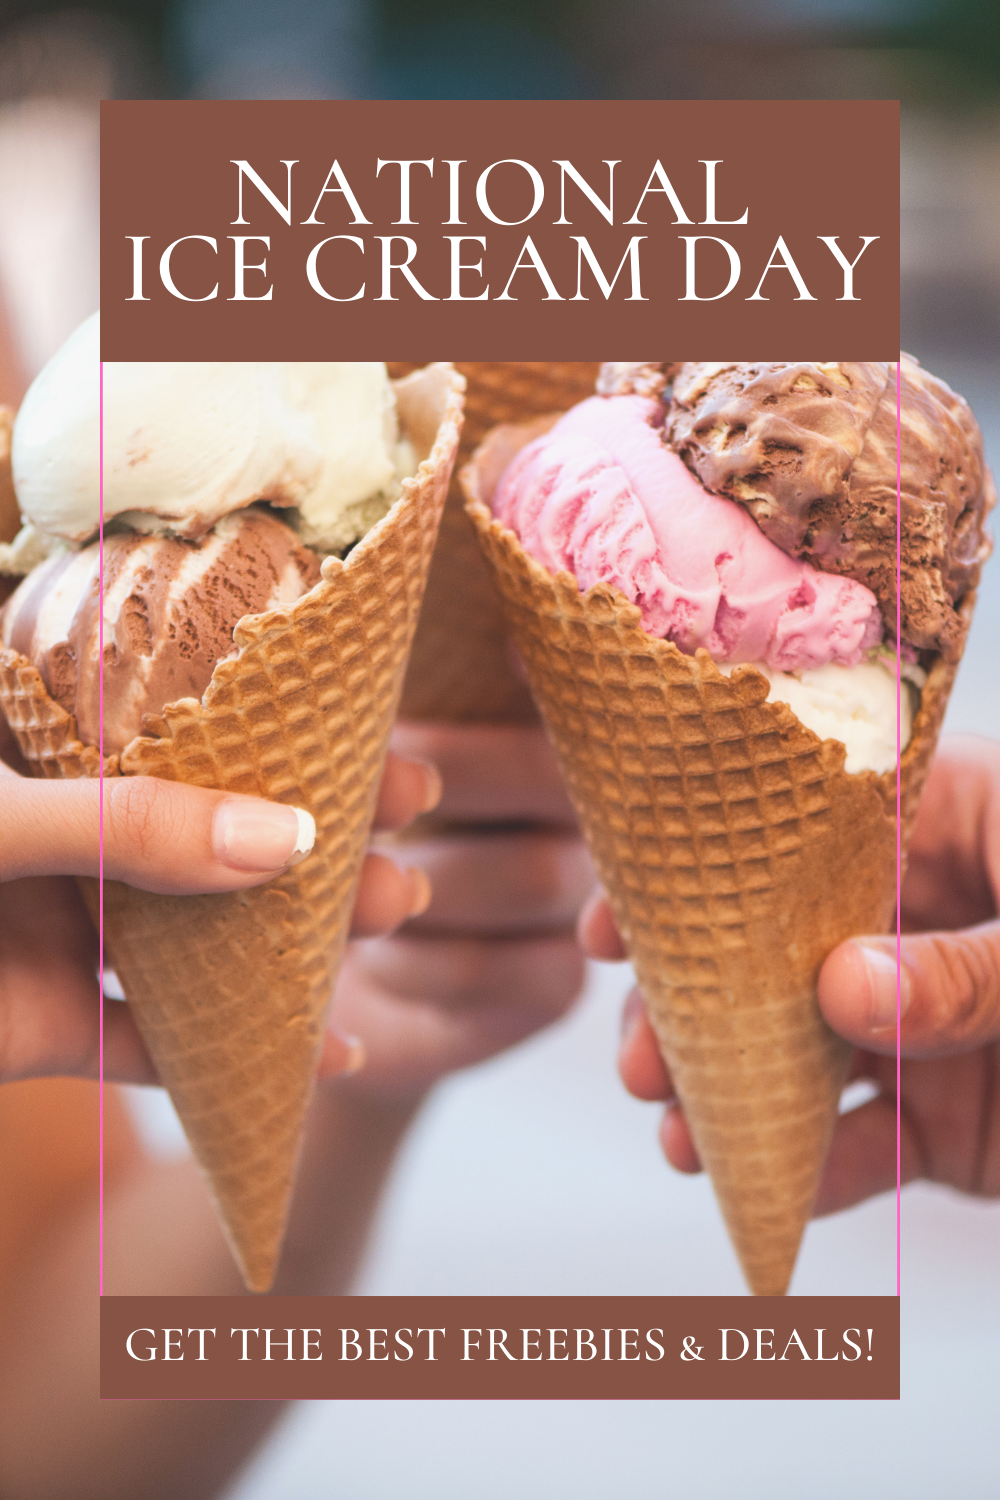 National Ice Cream Day Kansas City and National Enza's Bargains